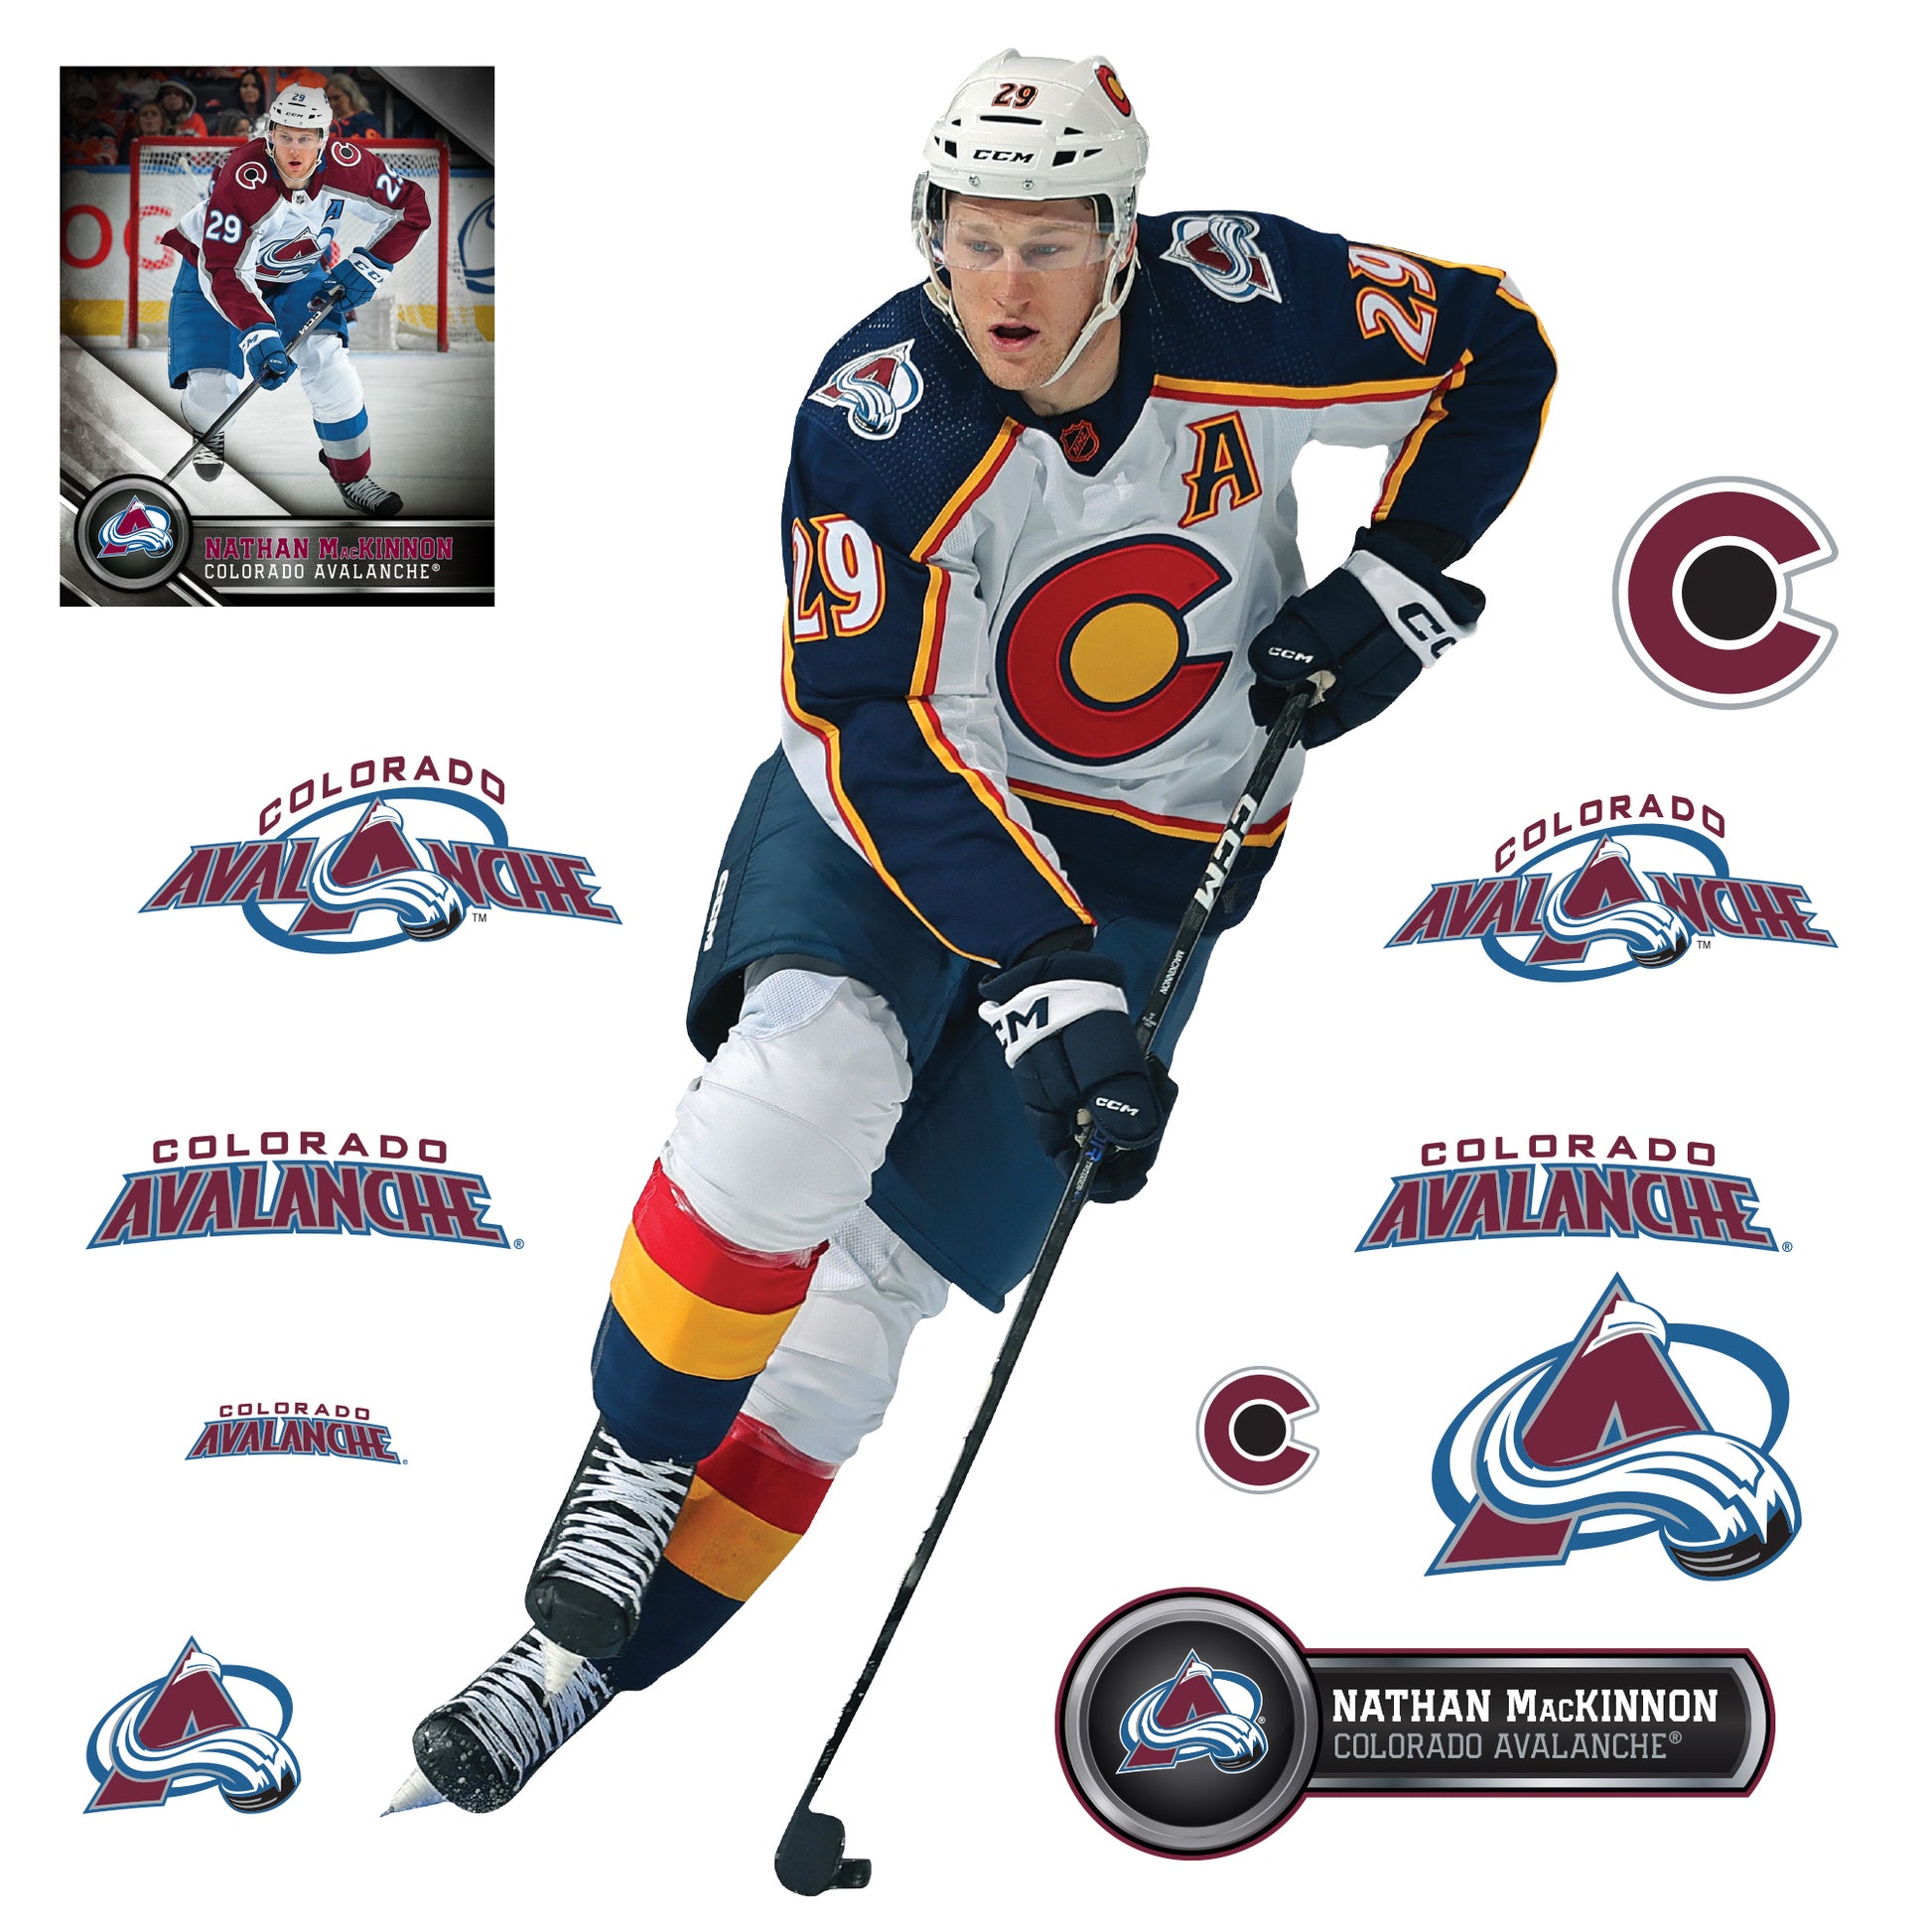 Colorado Avalanche on X: You'll get this jersey when you buy